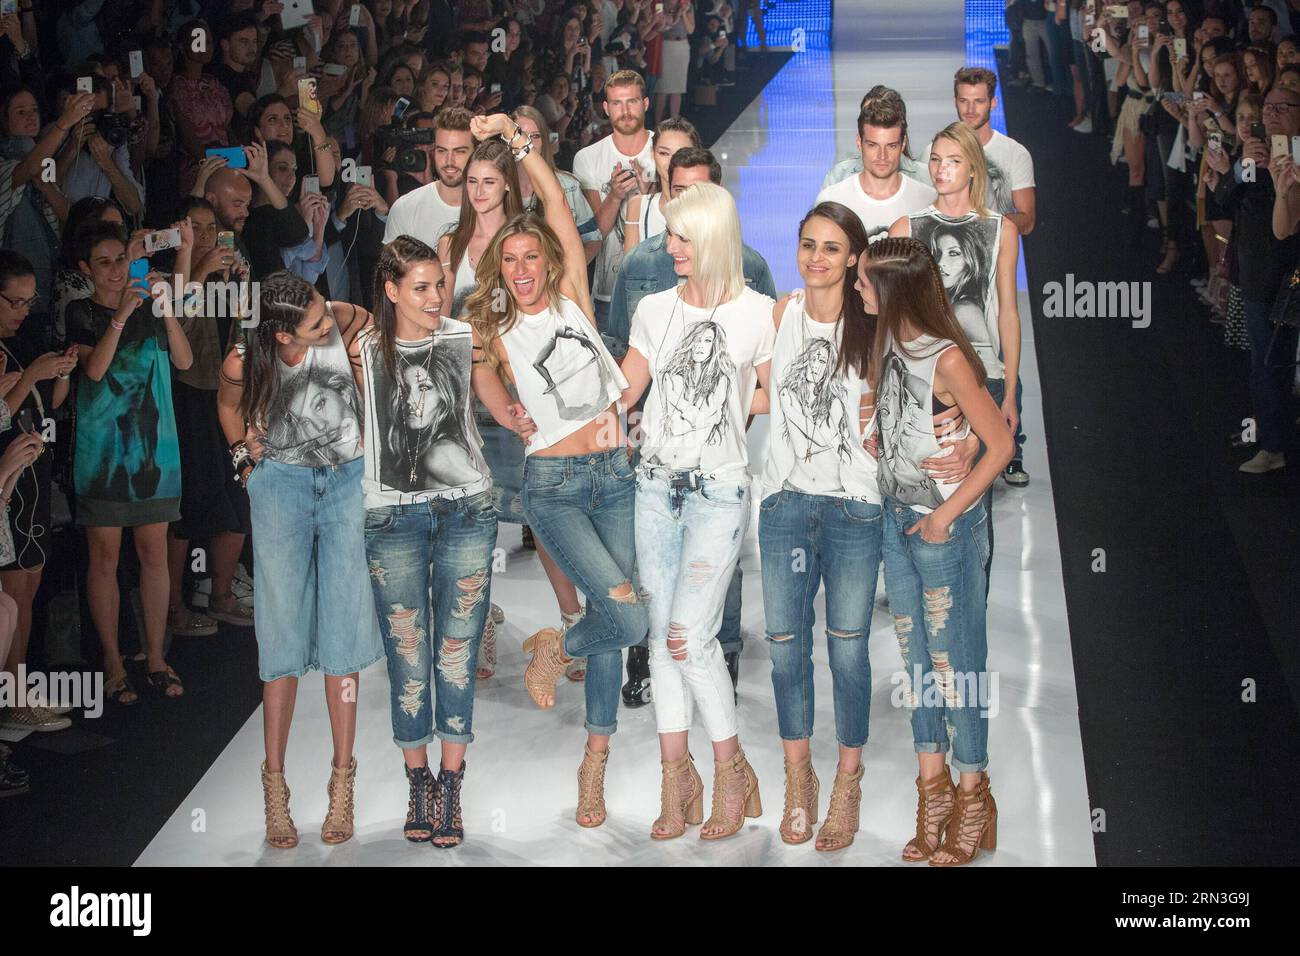 SAO PAULO, April 15, 2015 -- Brazilian supermodel Gisele Bundchen (3rd L, front) reacts with other models during a fashion show of Colcci on Sao Paulo Fashion Week in Sao Paulo, Brazil, April 15, 2015. Gisele Bundchen made her last catwalk stroll down Wednesday night, putting an farewell to her 20-year career which has made her a legend in fashion industry. The 34-year-old Brazilian woman is currently the world s highest-paid model according to a Forbes magazine ranking in 2014. ) (bxq) BRAZIL-SAO PAULO-GISELE BUNDCHEN RETIRES XuxZijian PUBLICATIONxNOTxINxCHN   Sao Paulo April 15 2015 Brazilia Stock Photo